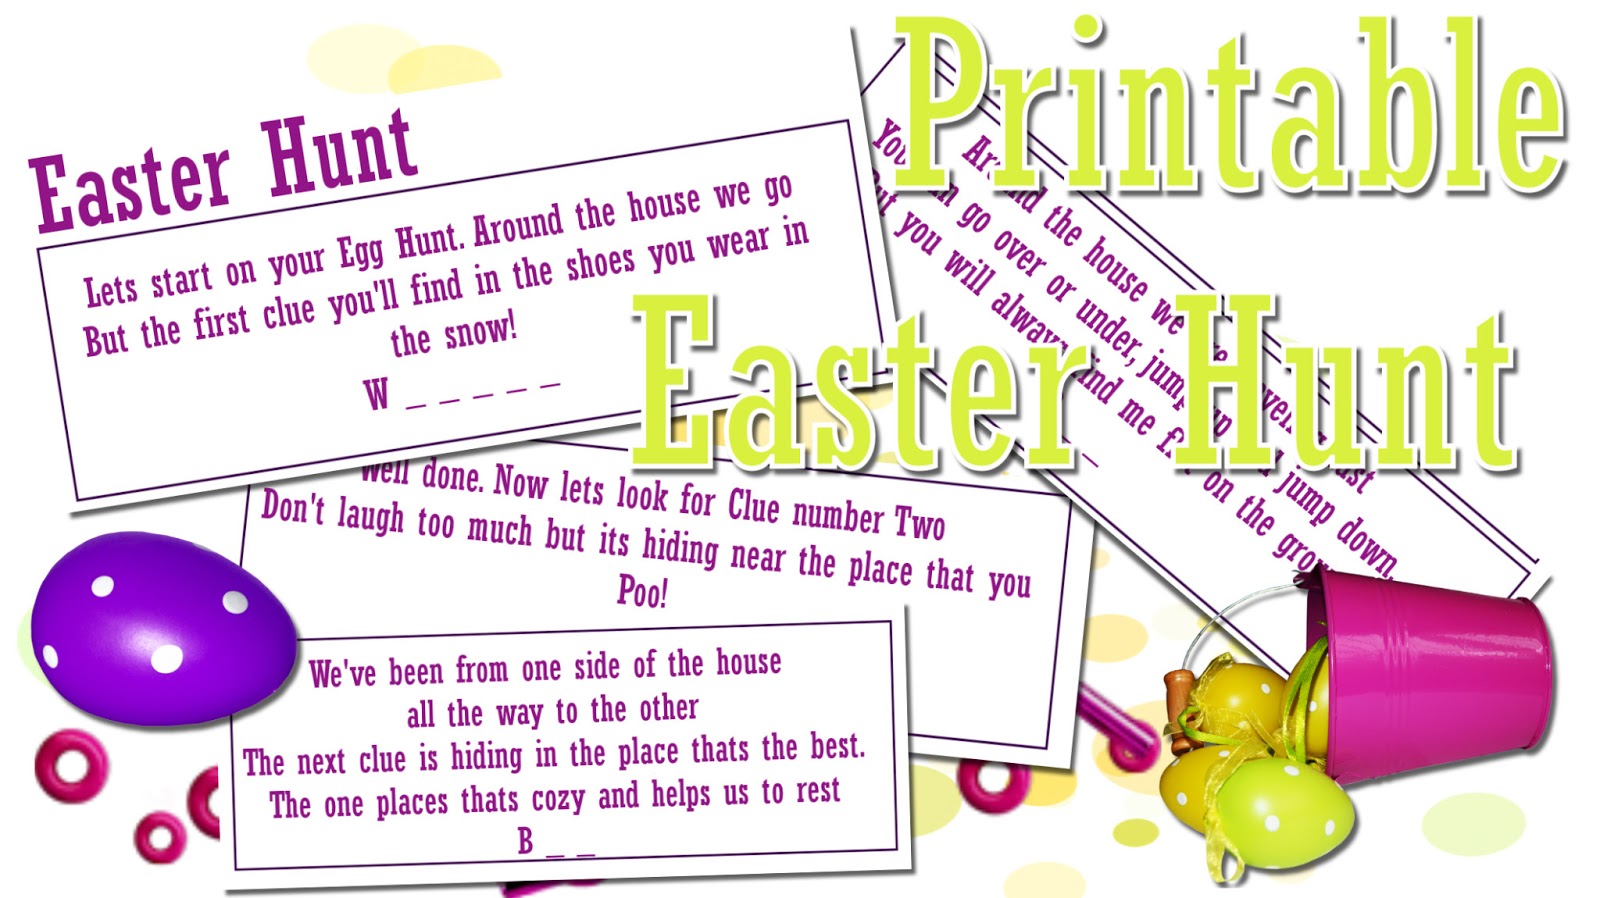 This Is Me Sarah Mum Of 3 Fun Easter Egg Hunt Print Out 